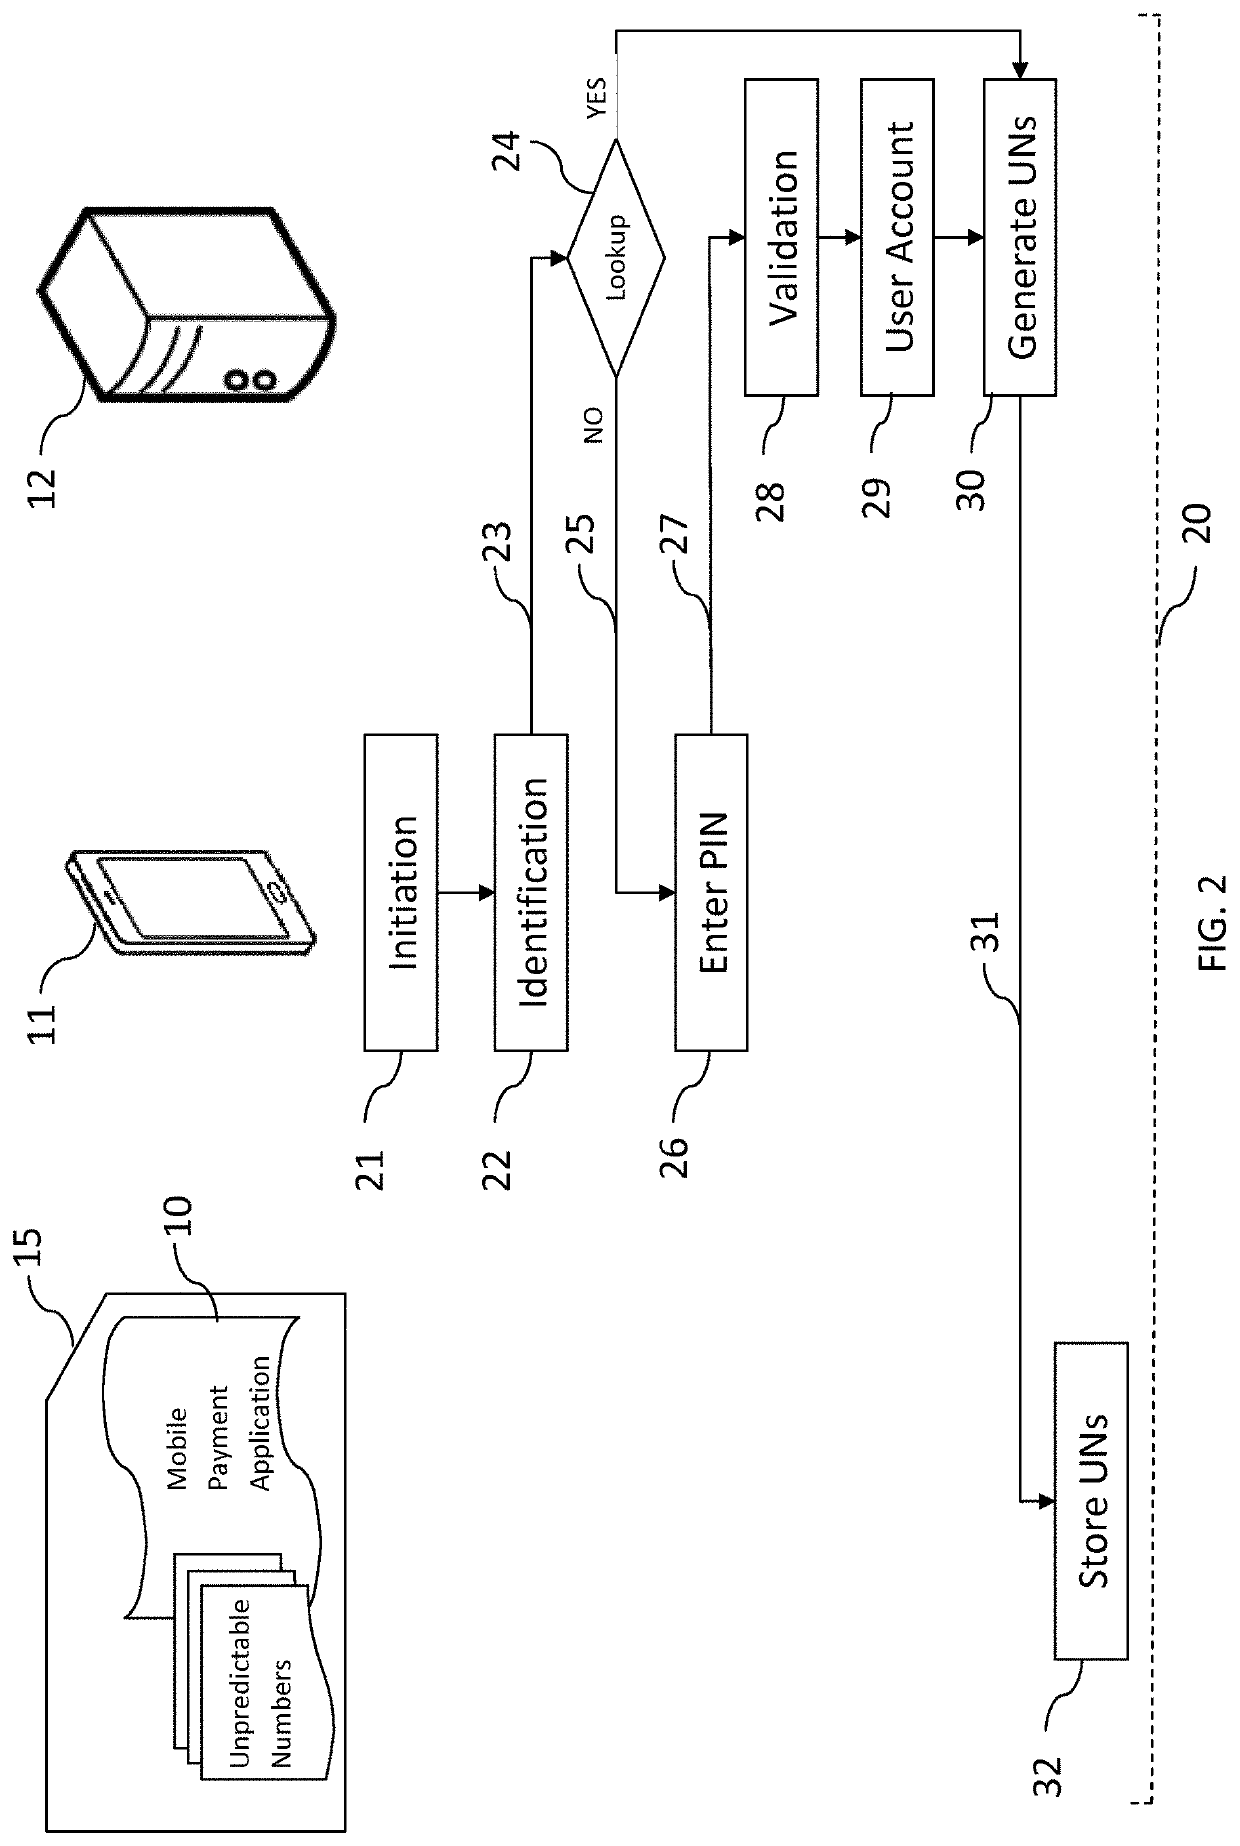 Method for authenticating transactions